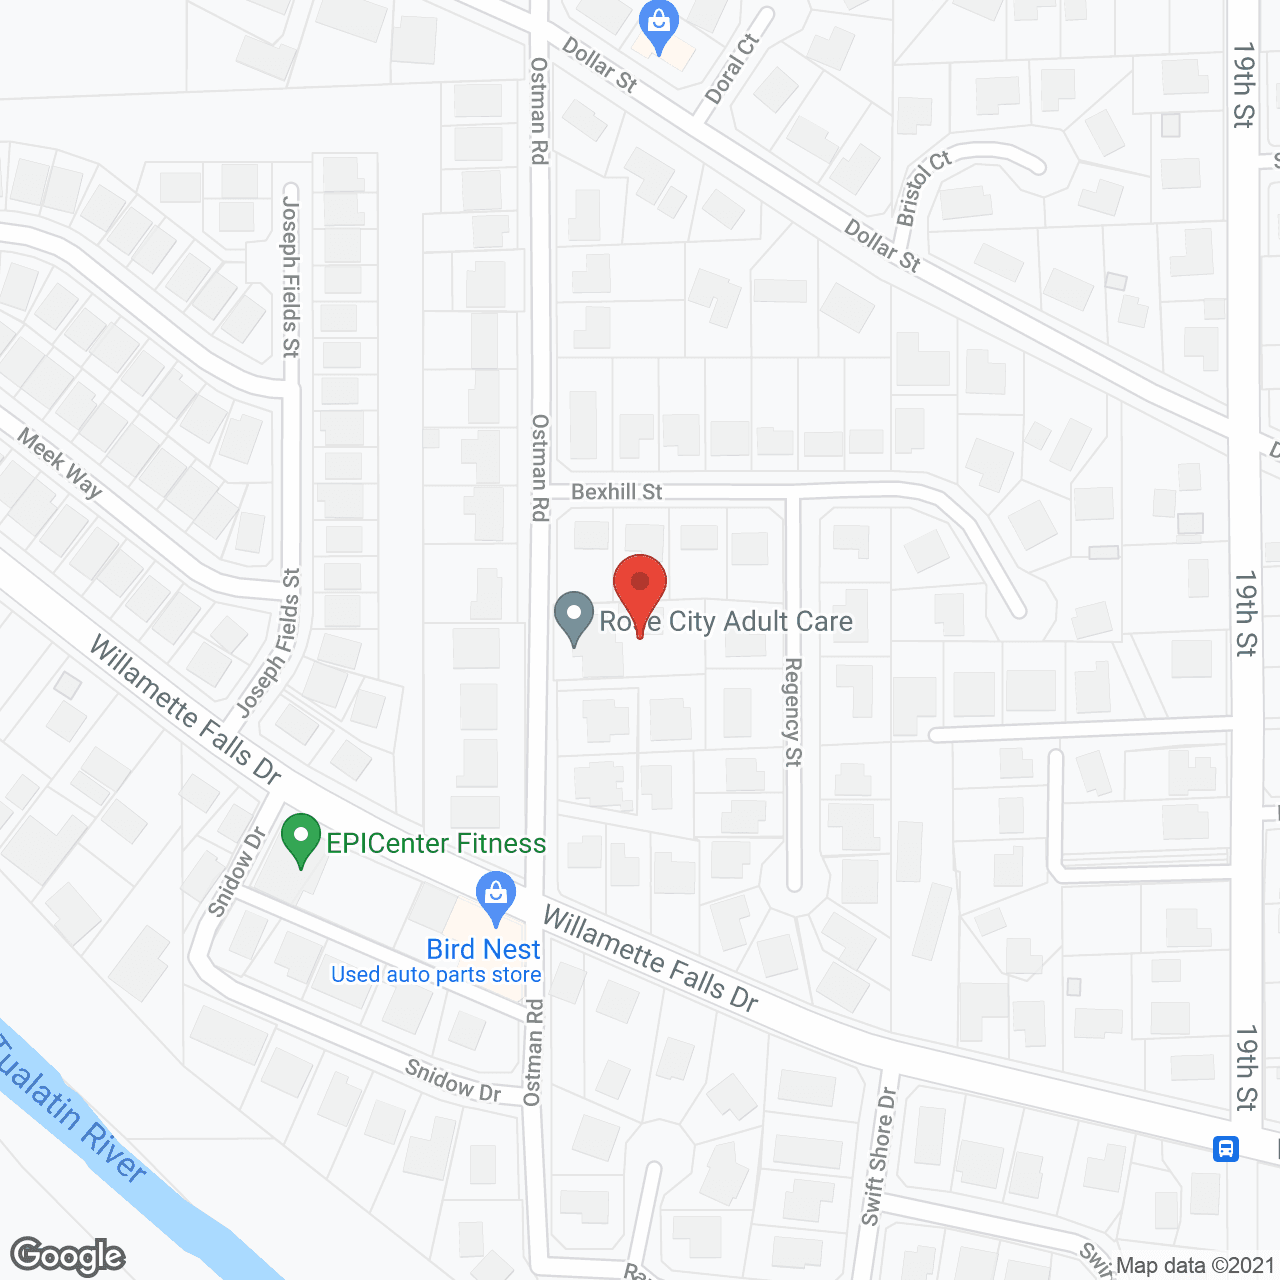 Rose City Adult Care in google map